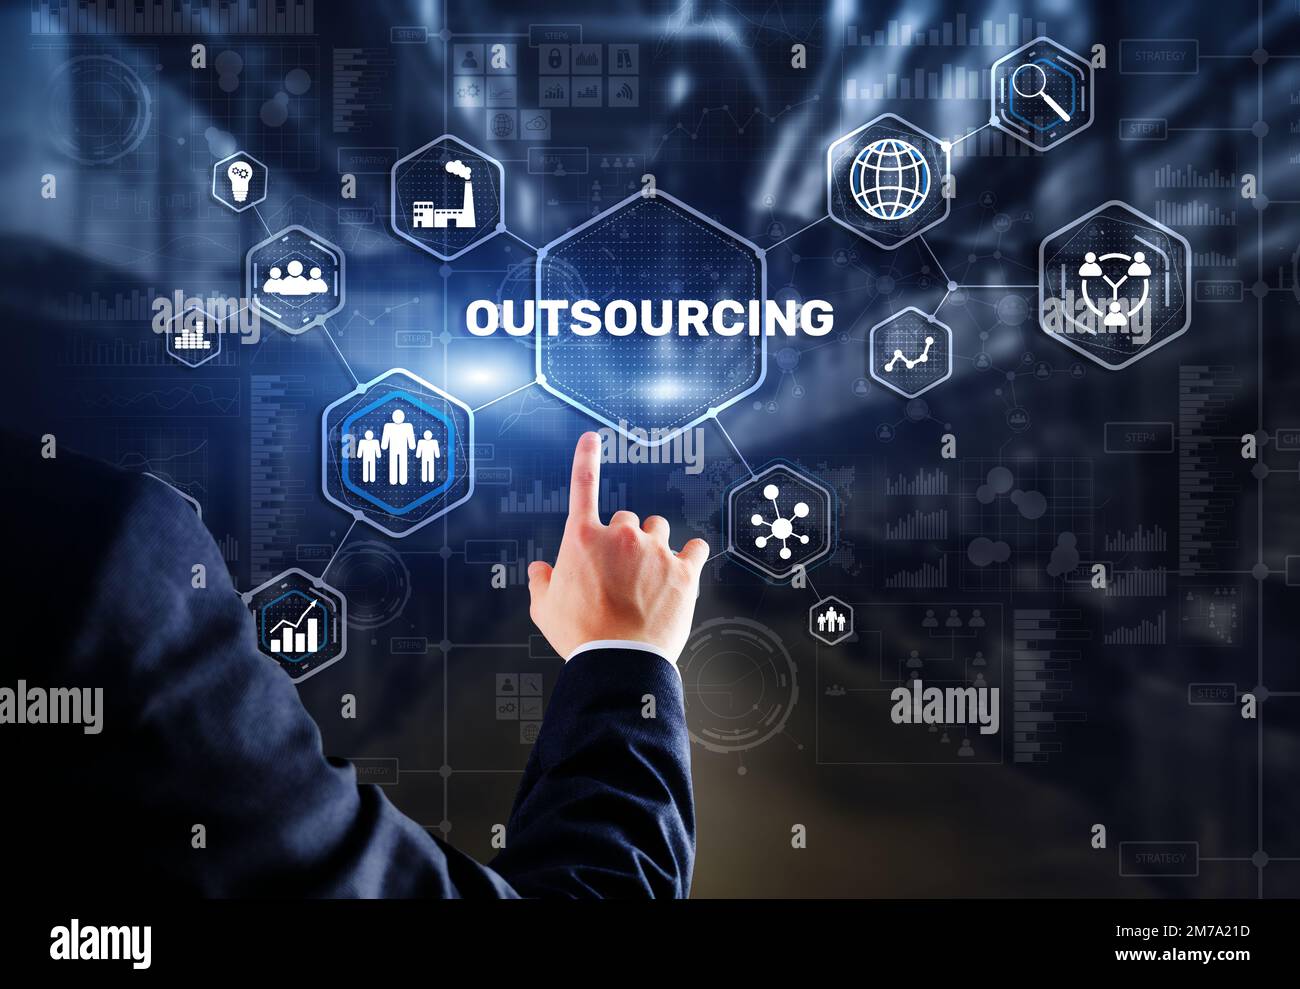 Outsourcing Business Human Resources Internet Finance Technology Concept Stock Photo